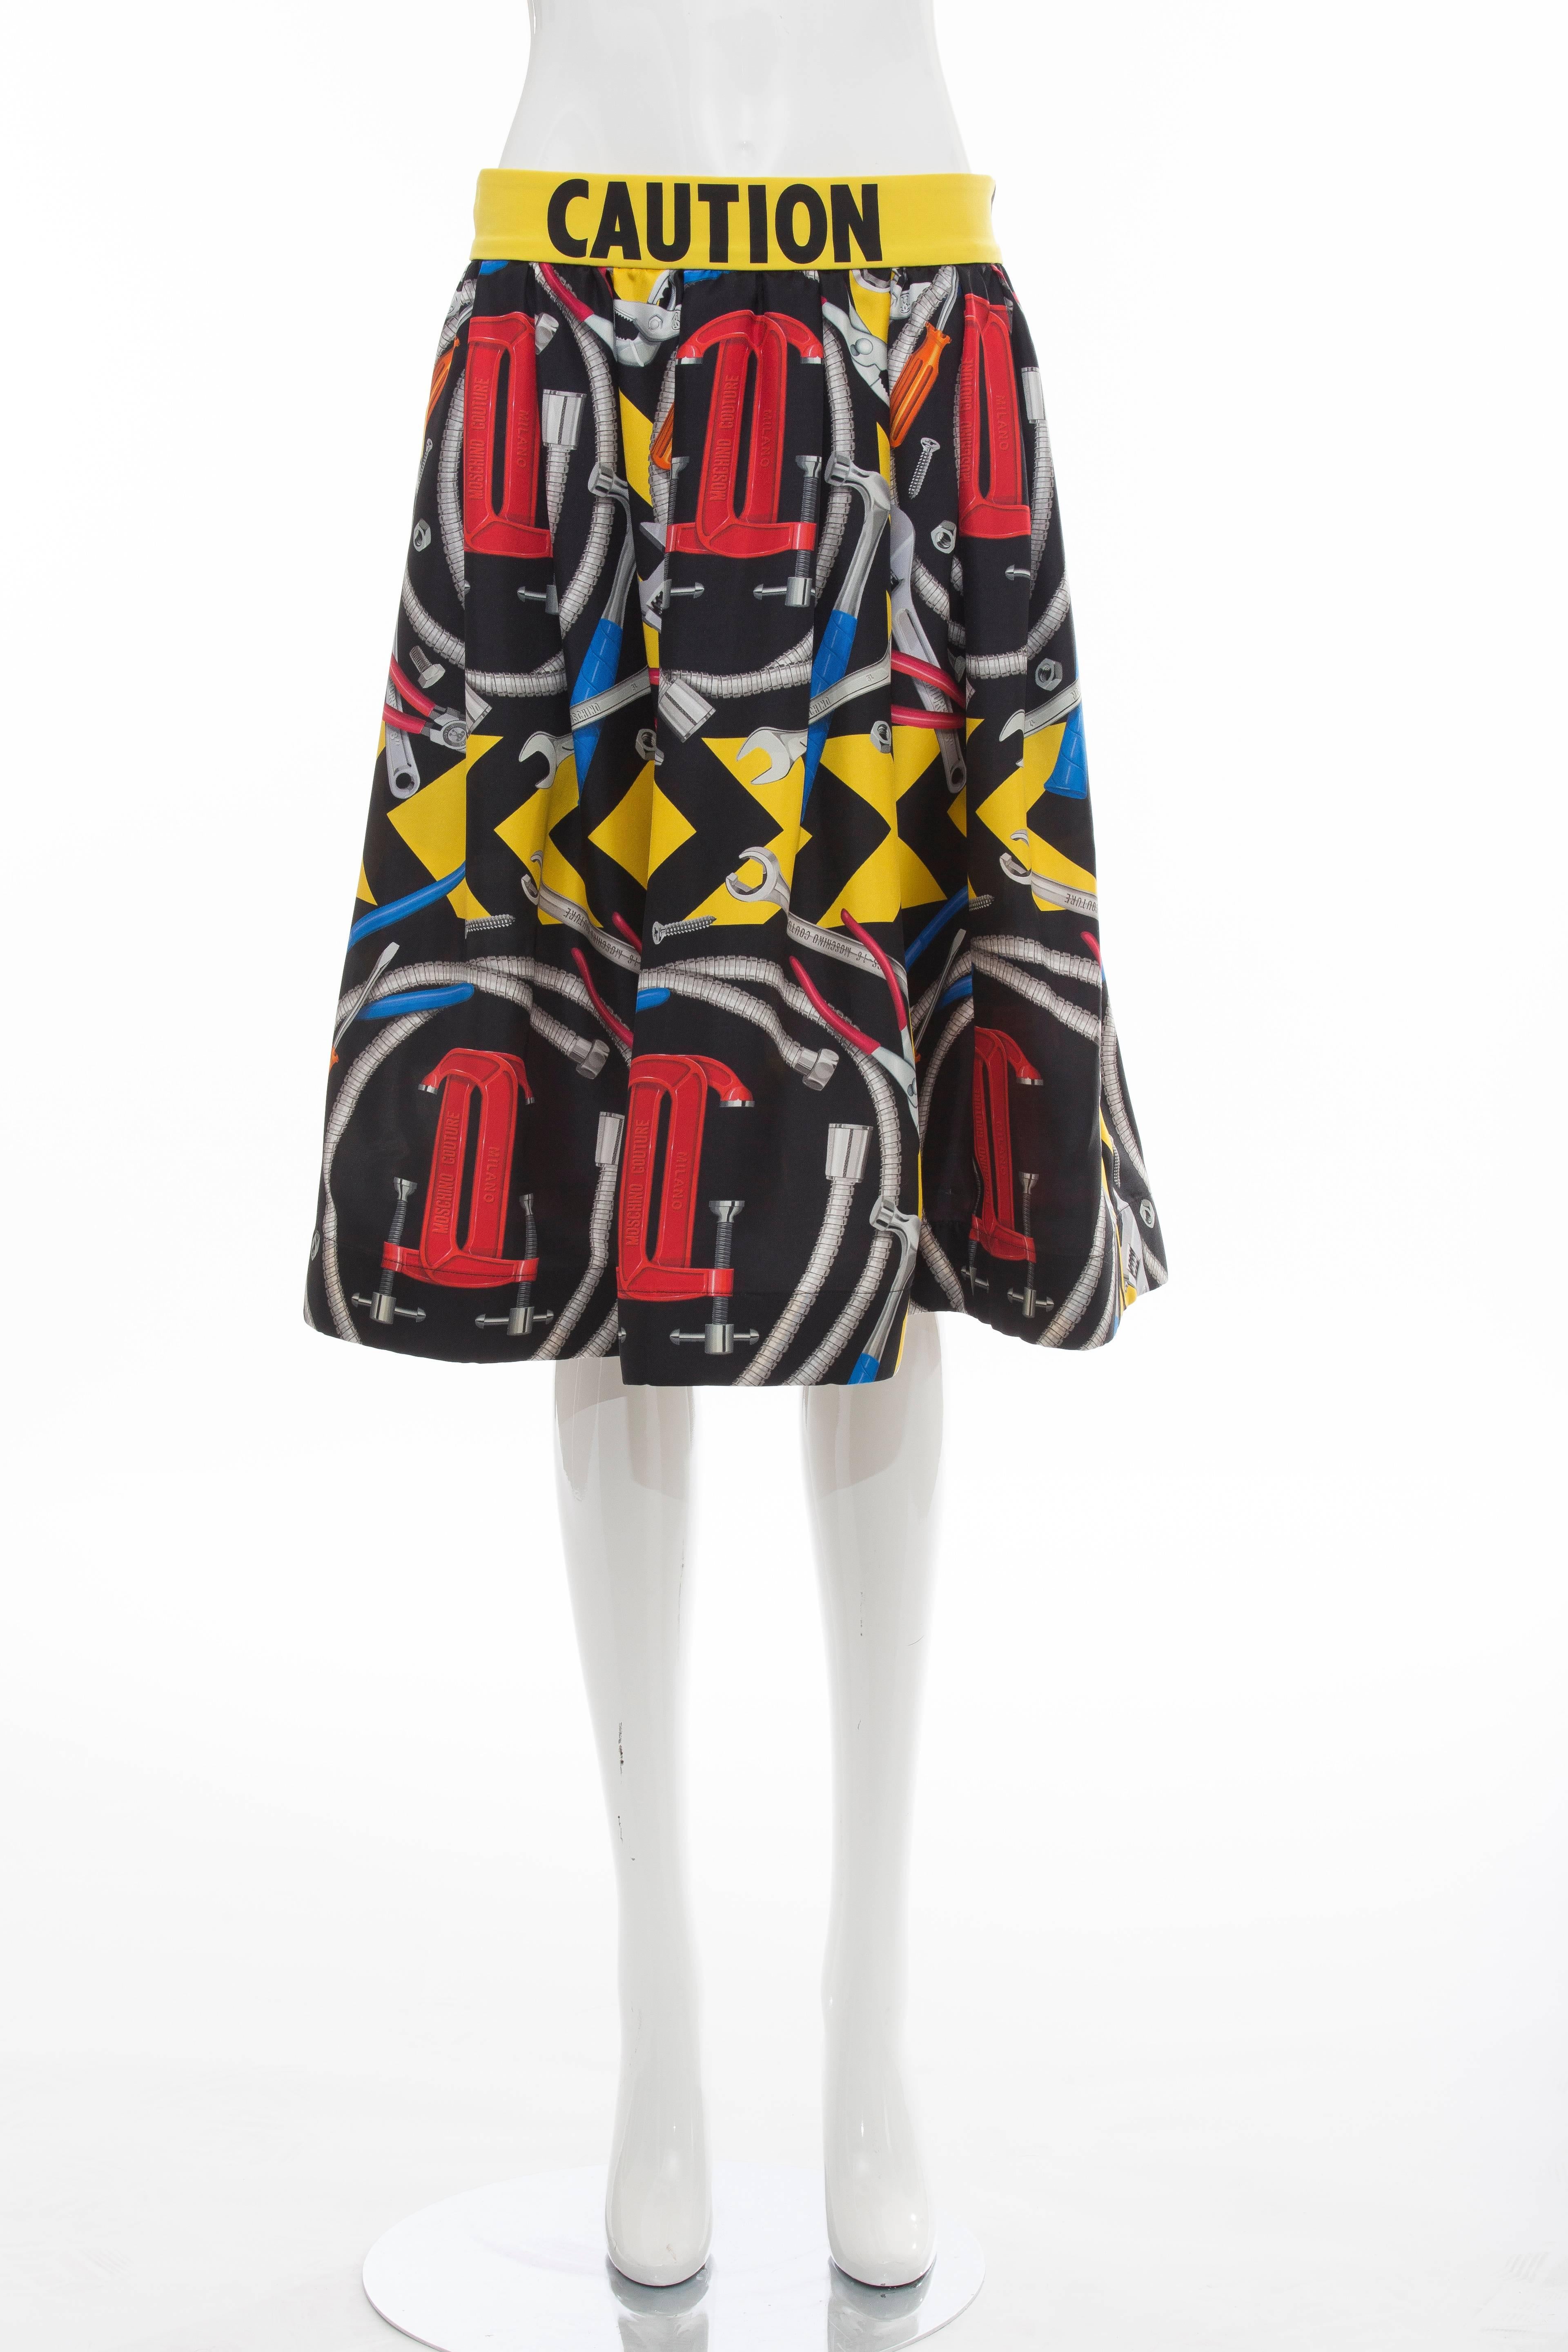 Jeremy Scott for Moschino Couture Runway (Look 32), Spring-Summer 2016 silk skirt with tool-accented print, graphic print at waistband, flounce hem and tonal stitching throughout.

IT. 48
US.12

Waist: 32, Hip 32, Length 25.5
